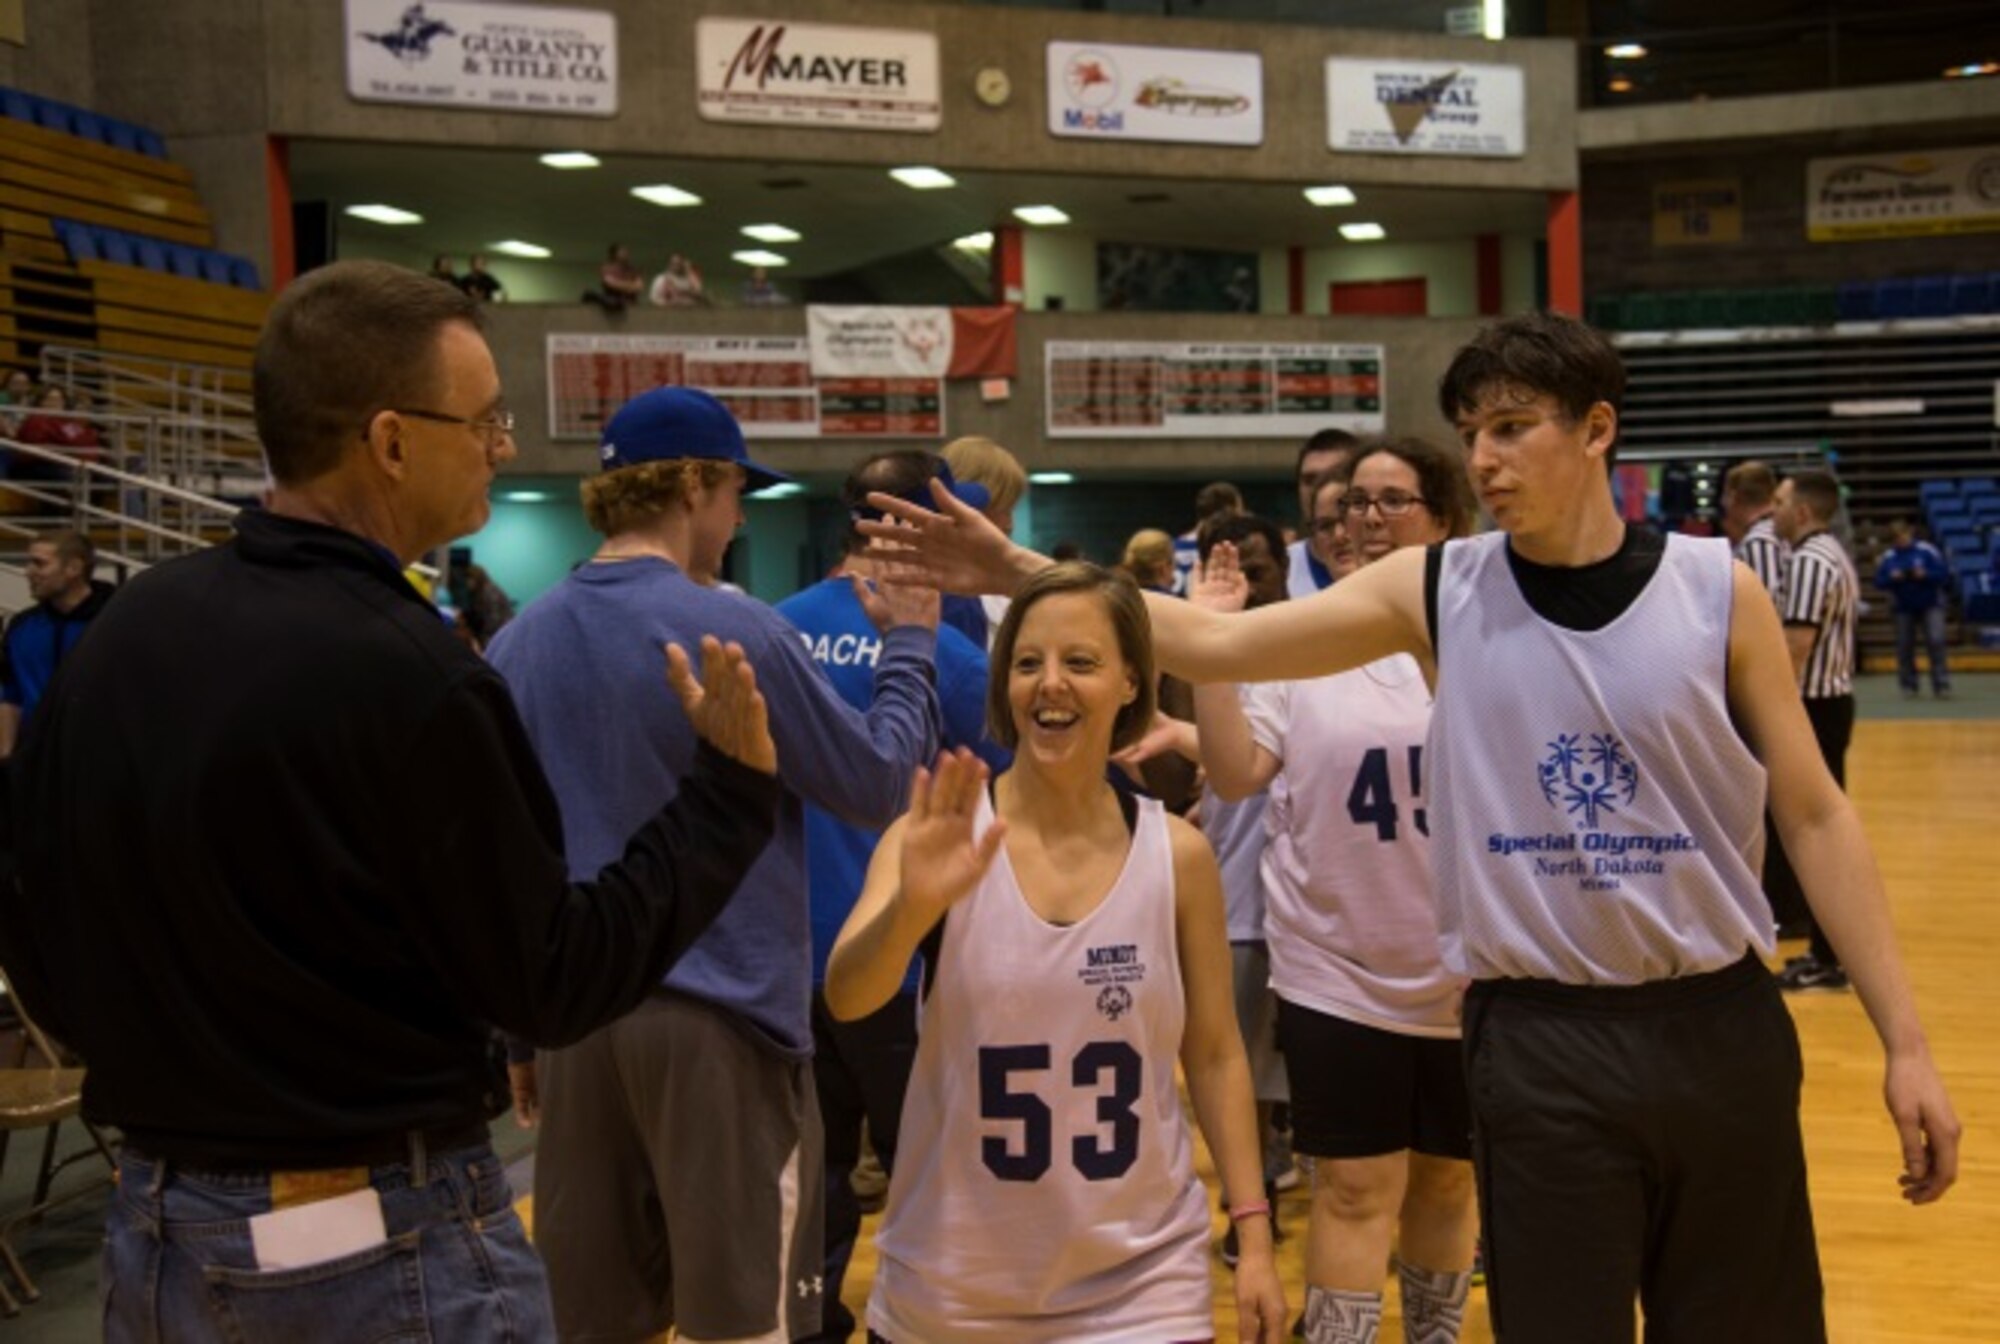 Members of the Minot Special Olympics team showcase their sportsmanship after a game at the North Dakota Special Olympics in Minot, N.D., March 4, 2016. Minot Air Force Base members volunteered at the event as referees and other volunteer positions. (U.S. Air Force photo/Airman 1st Class Christian Sullivan)